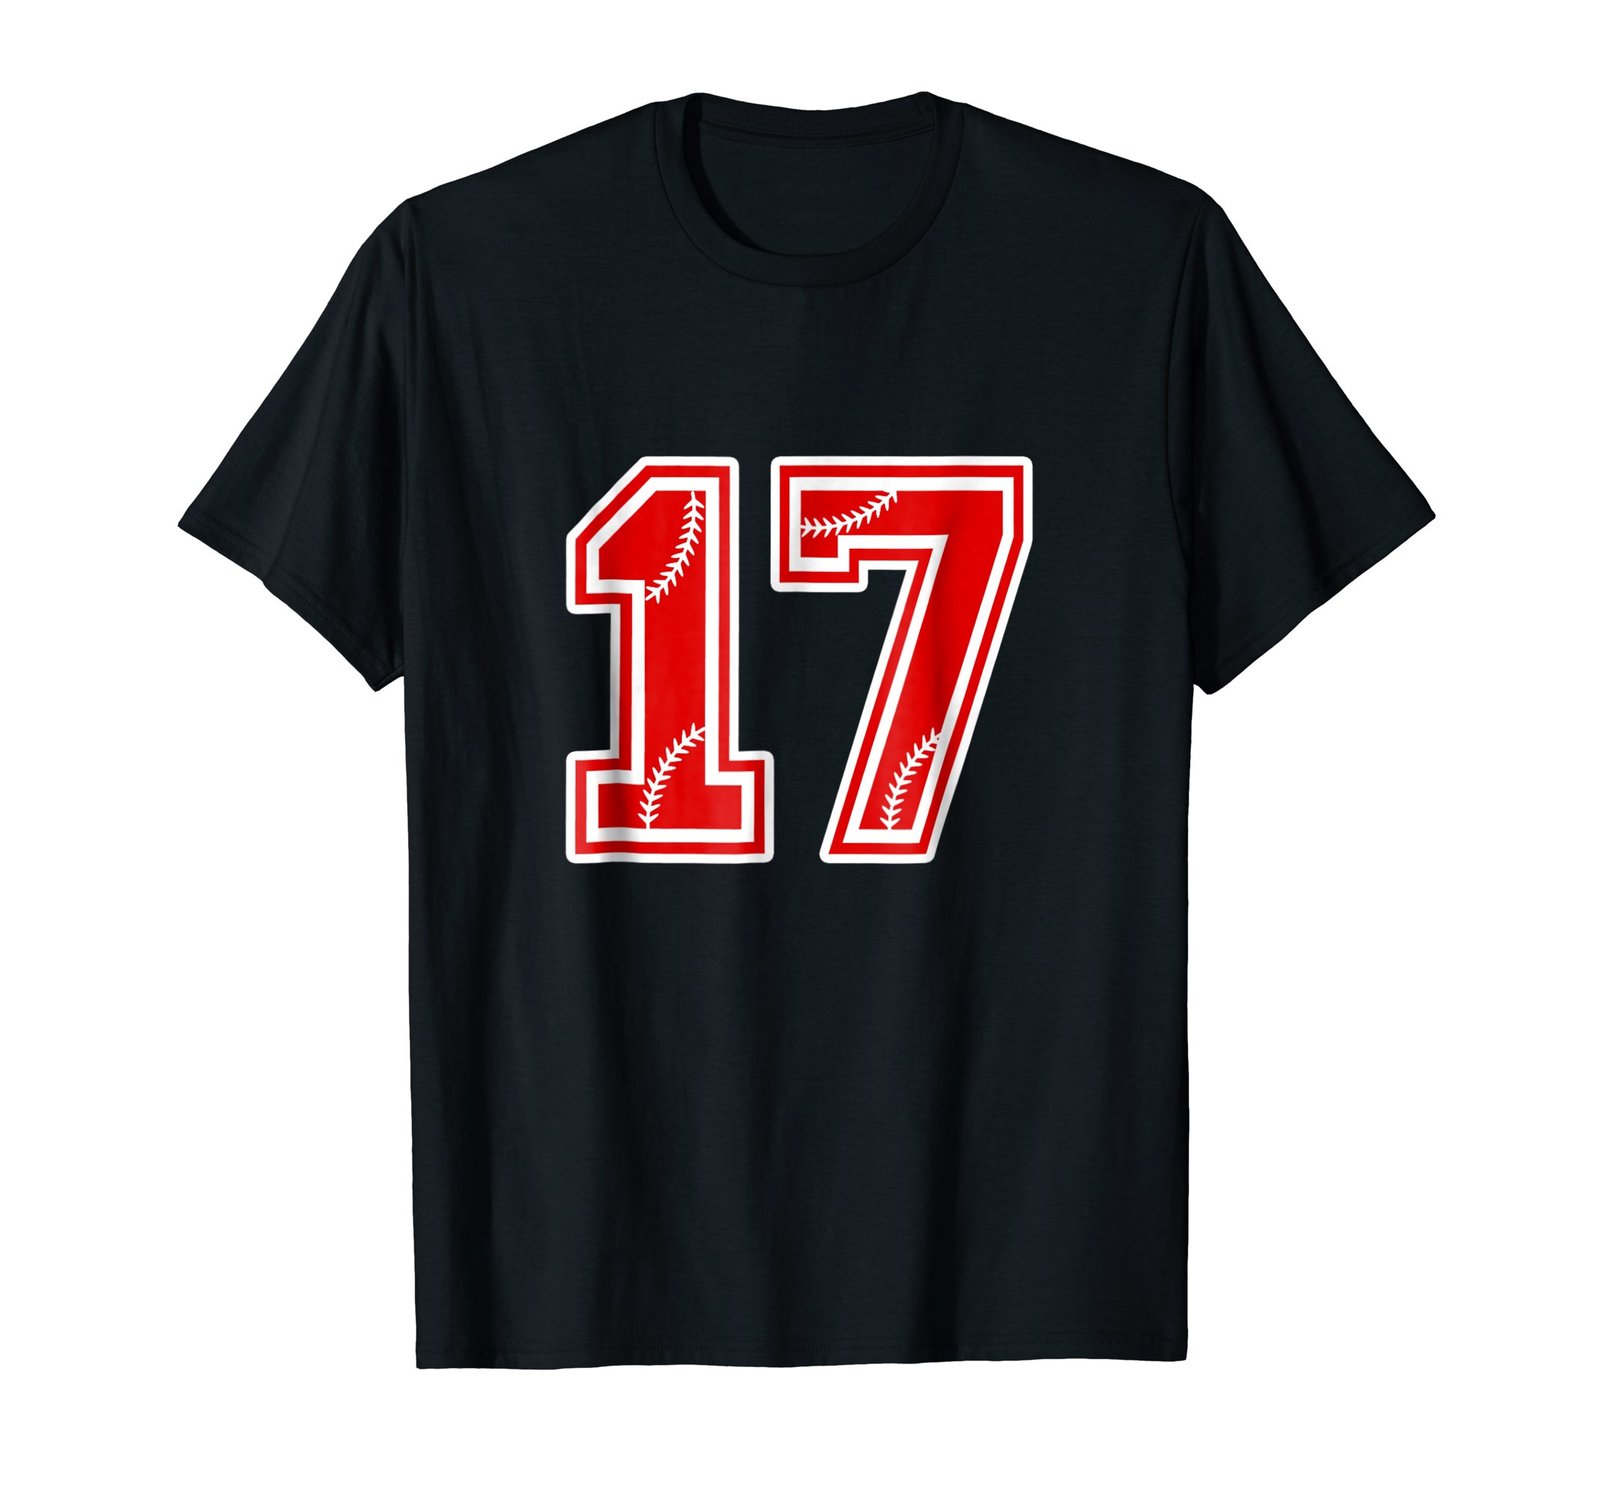 Number 17 Red Baseball Number Shirt Sports Tee - T-Shirts, Tank Tops